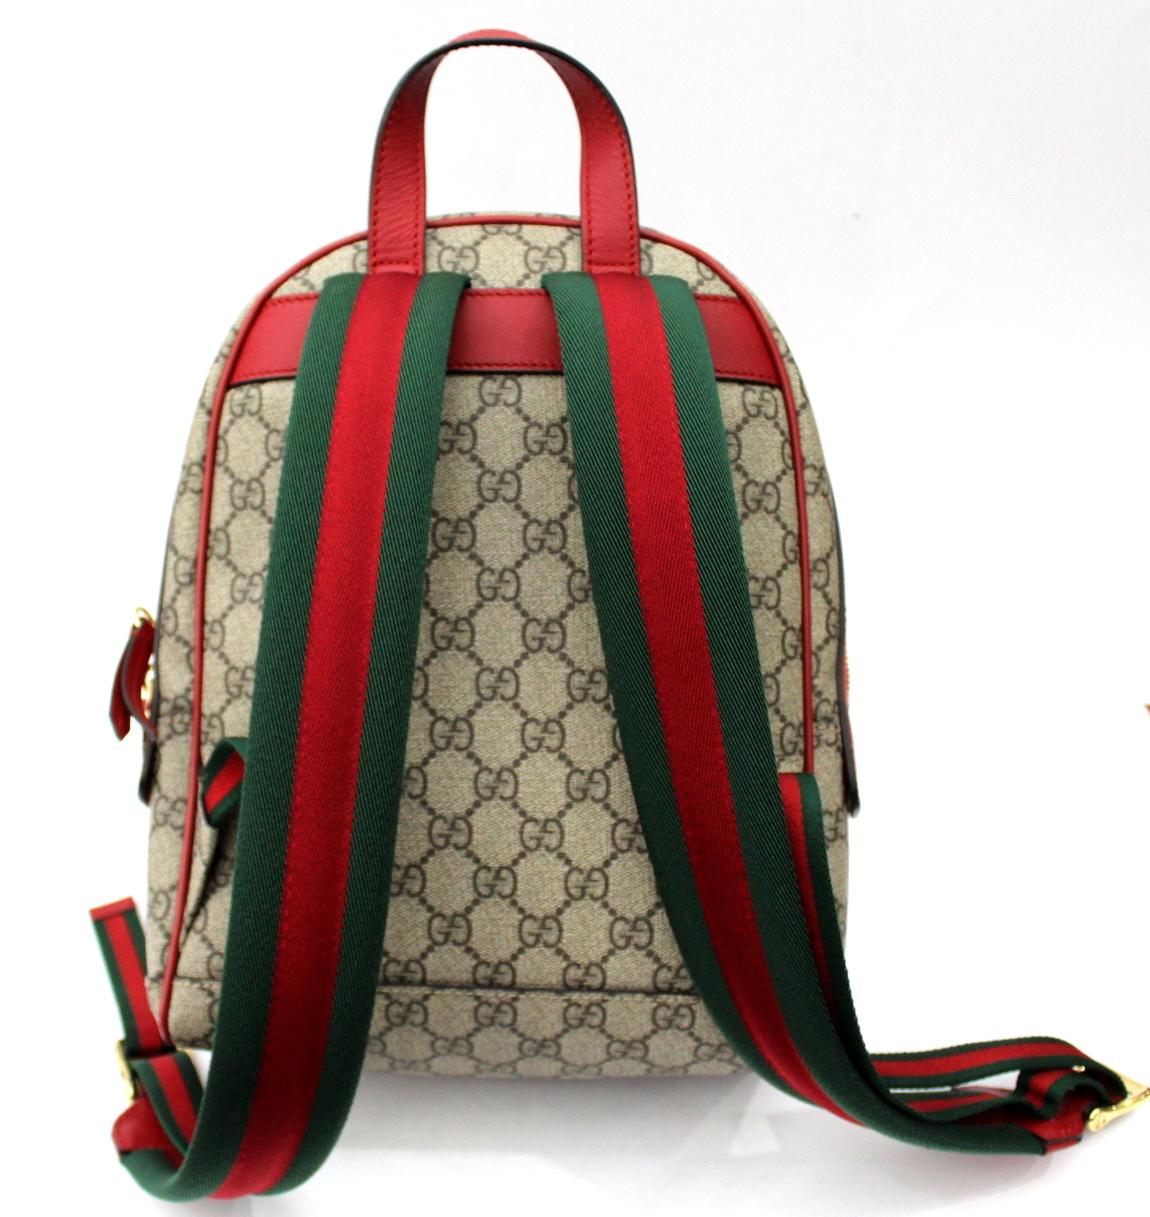 GG Supreme limited edition backpack with embroidered flower, snake and heart appliquésGG Supreme beige / ebony fabric Gucci Signature dark red leather with dark red leather trim.Applications flower, snake and embroidered heart.Front pocket with